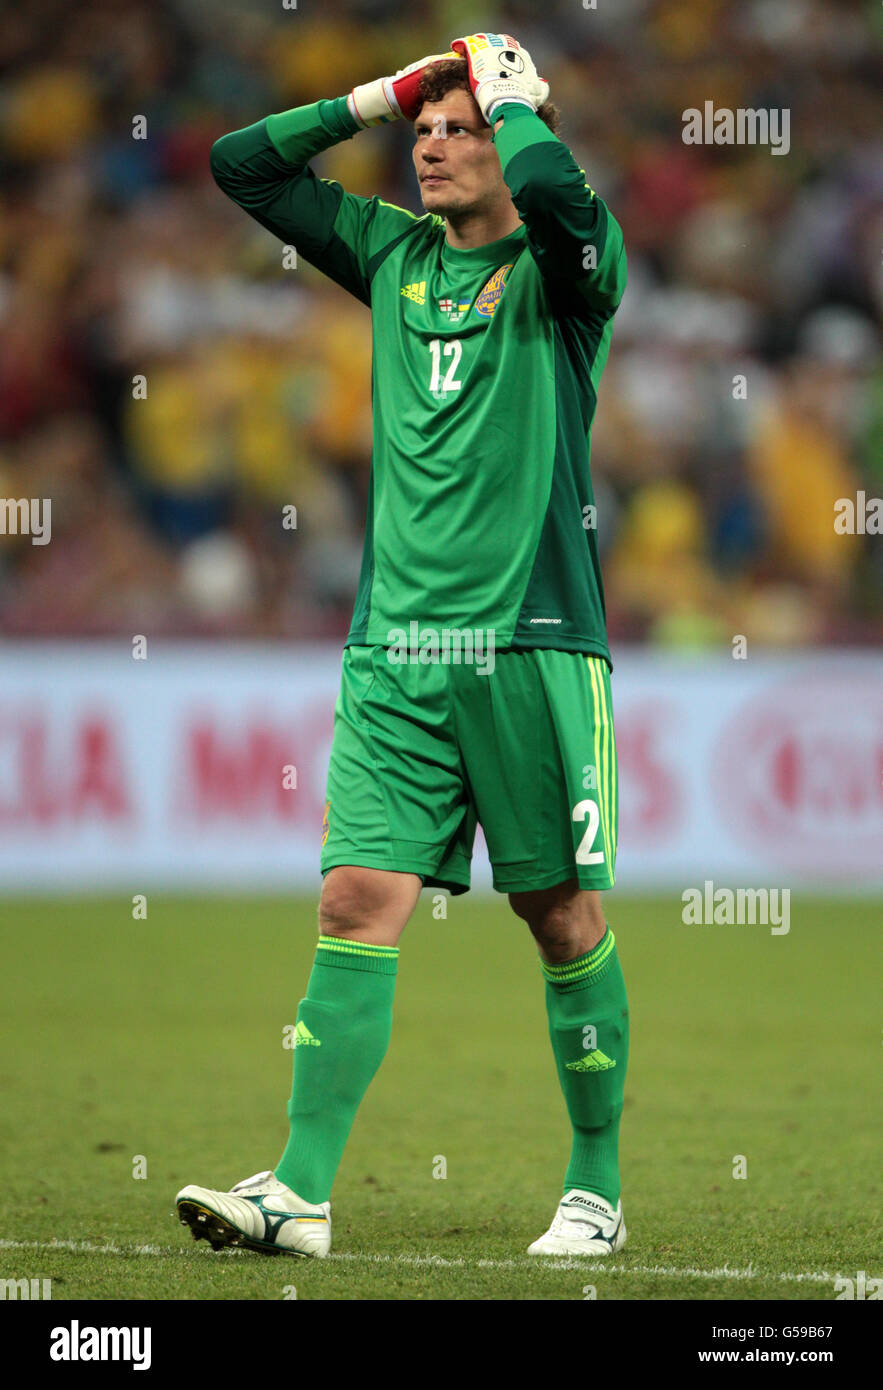 Ukraine goalkeeper Andriy Pyatov shows his dejection after an error that leads to England's Wayne Rooney scoring the winning goal Stock Photo